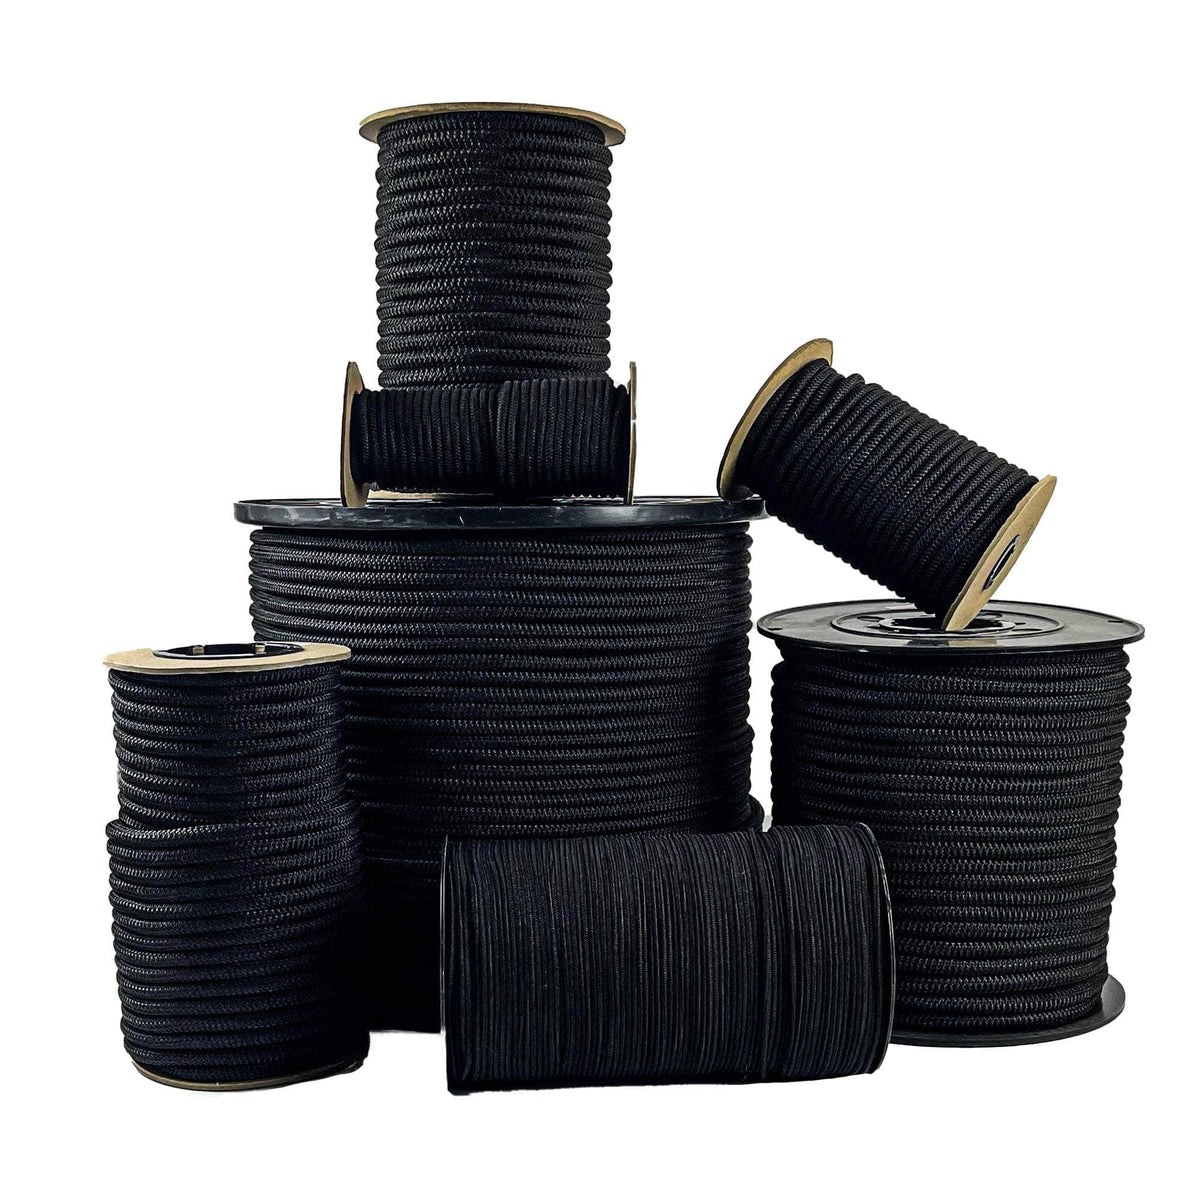 4mm/65.6 ft Elastic Bungee Shock Cord, TuNan Heavy Duty Round Stretch String Elastic Rope for DIY Crafts Tie Downs - Black